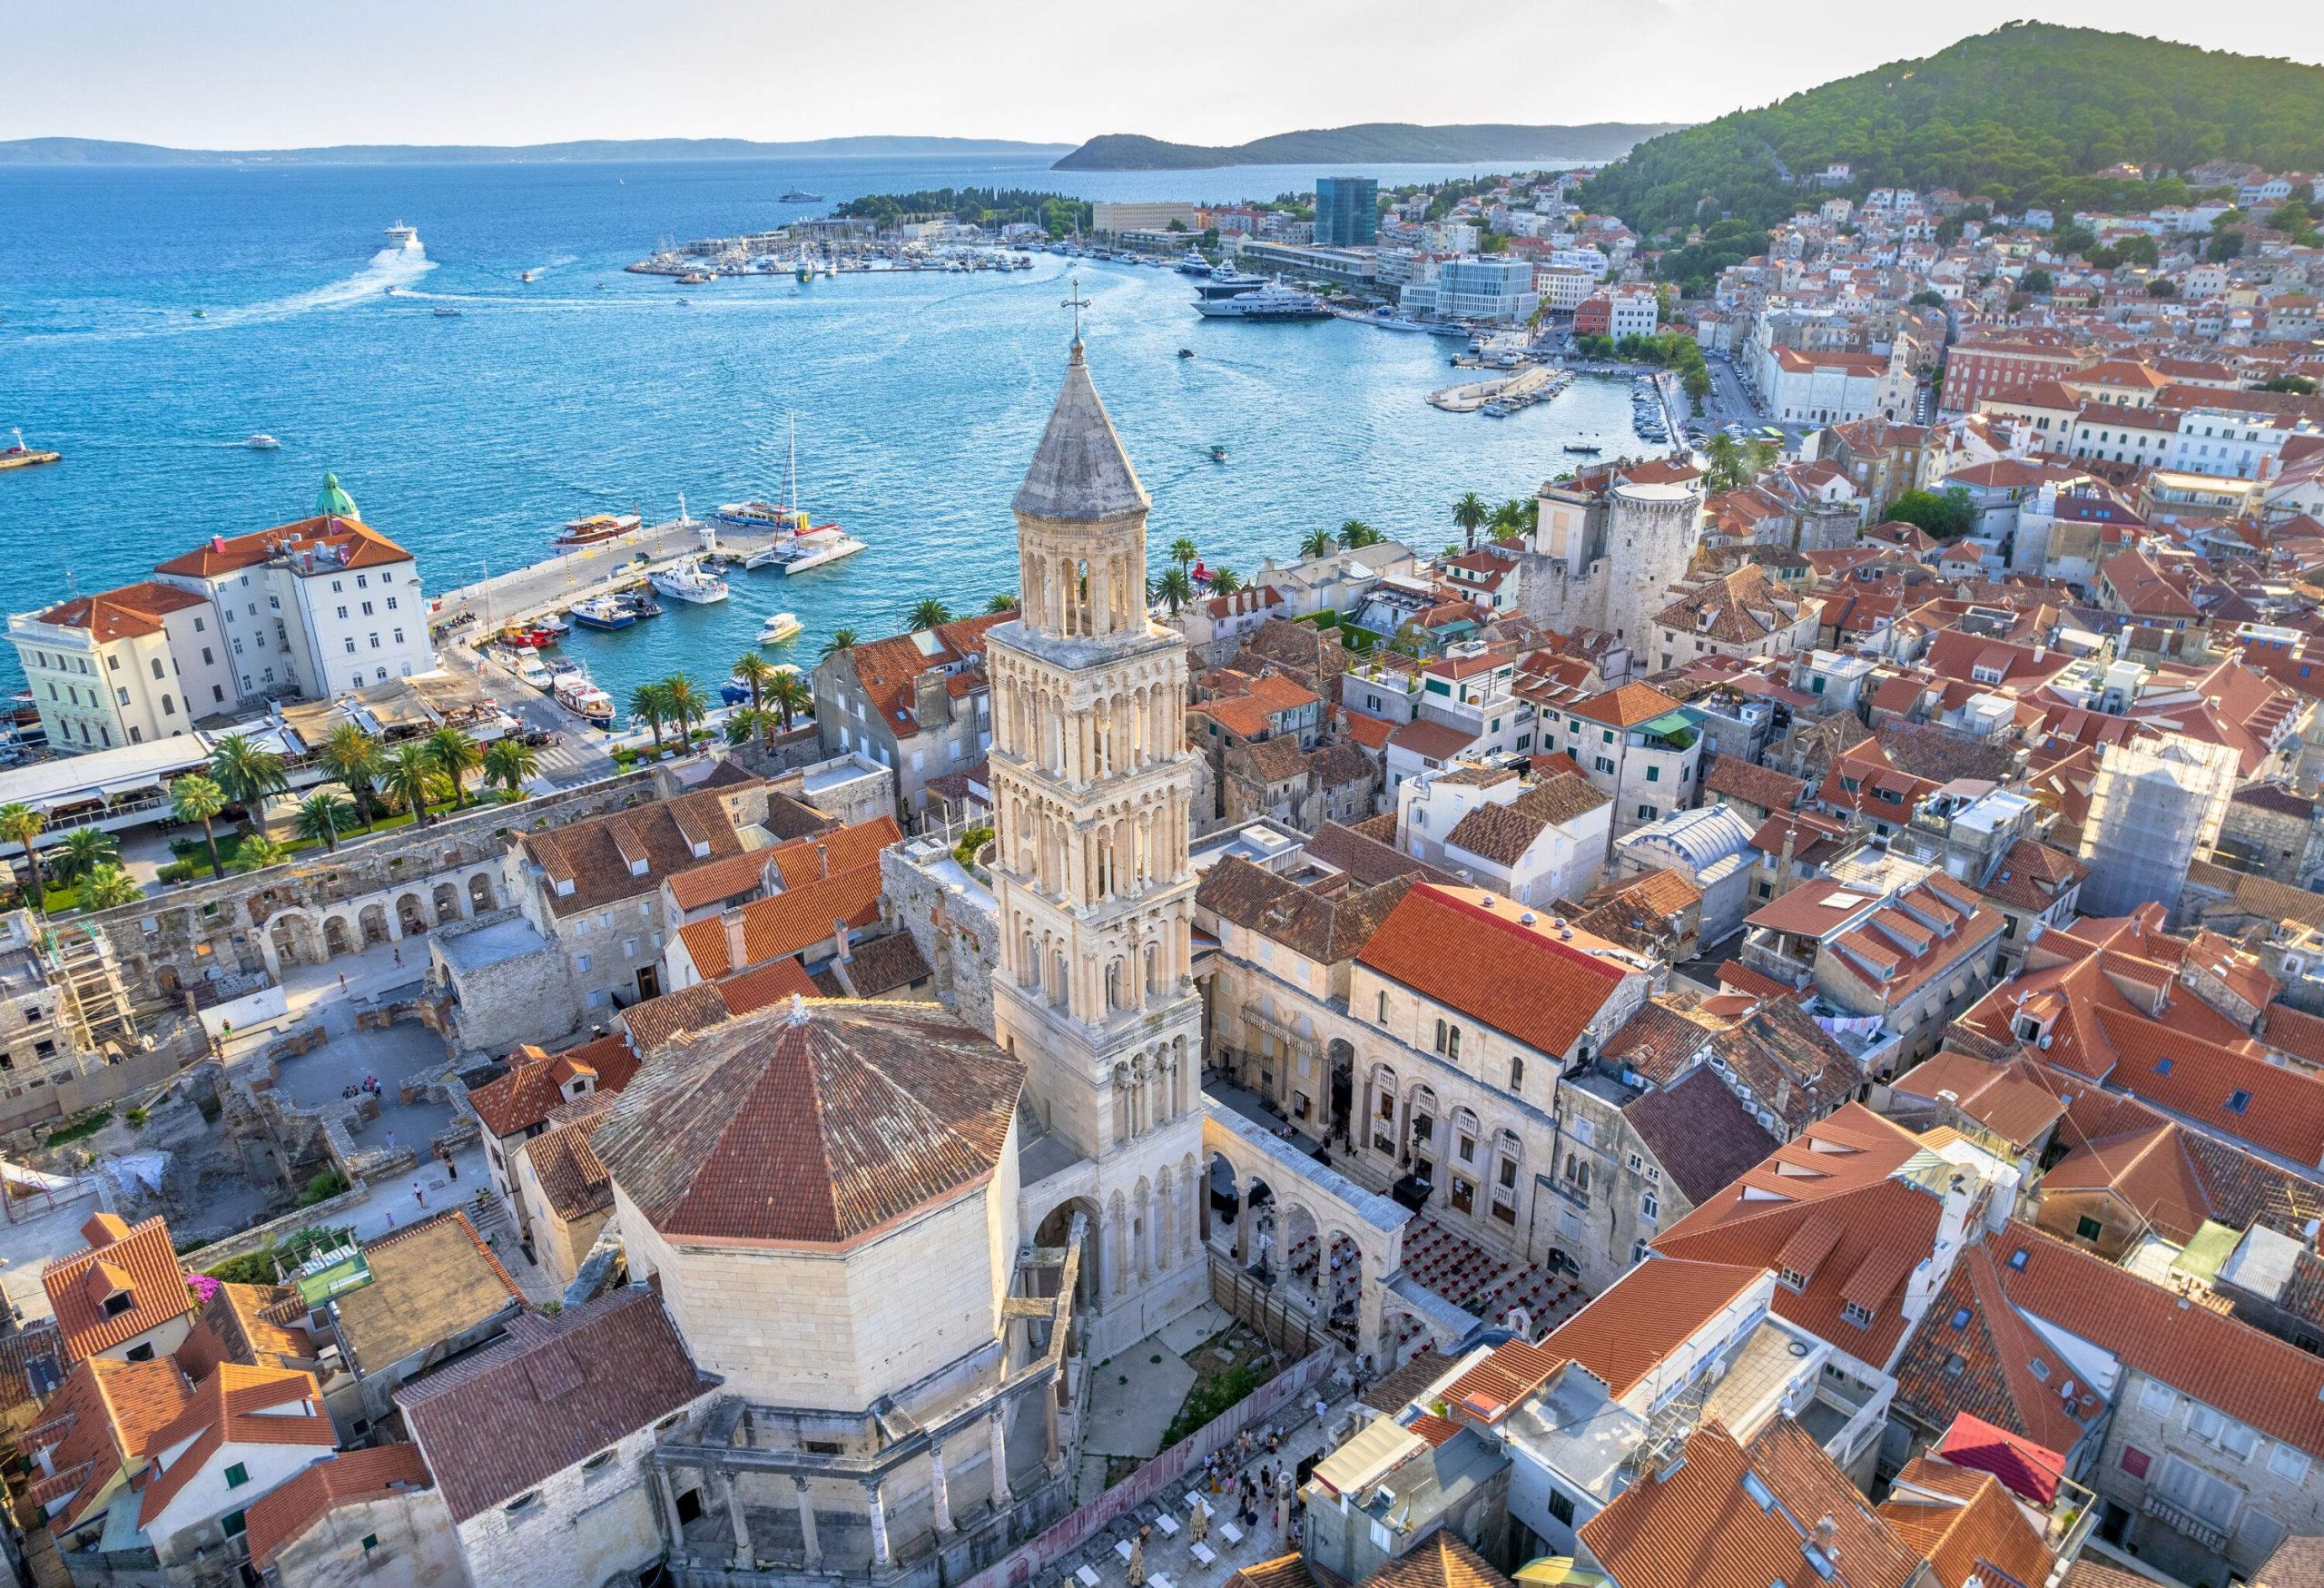 A palace's Romanesque bell tower soars above a coastal city's urban landscape.